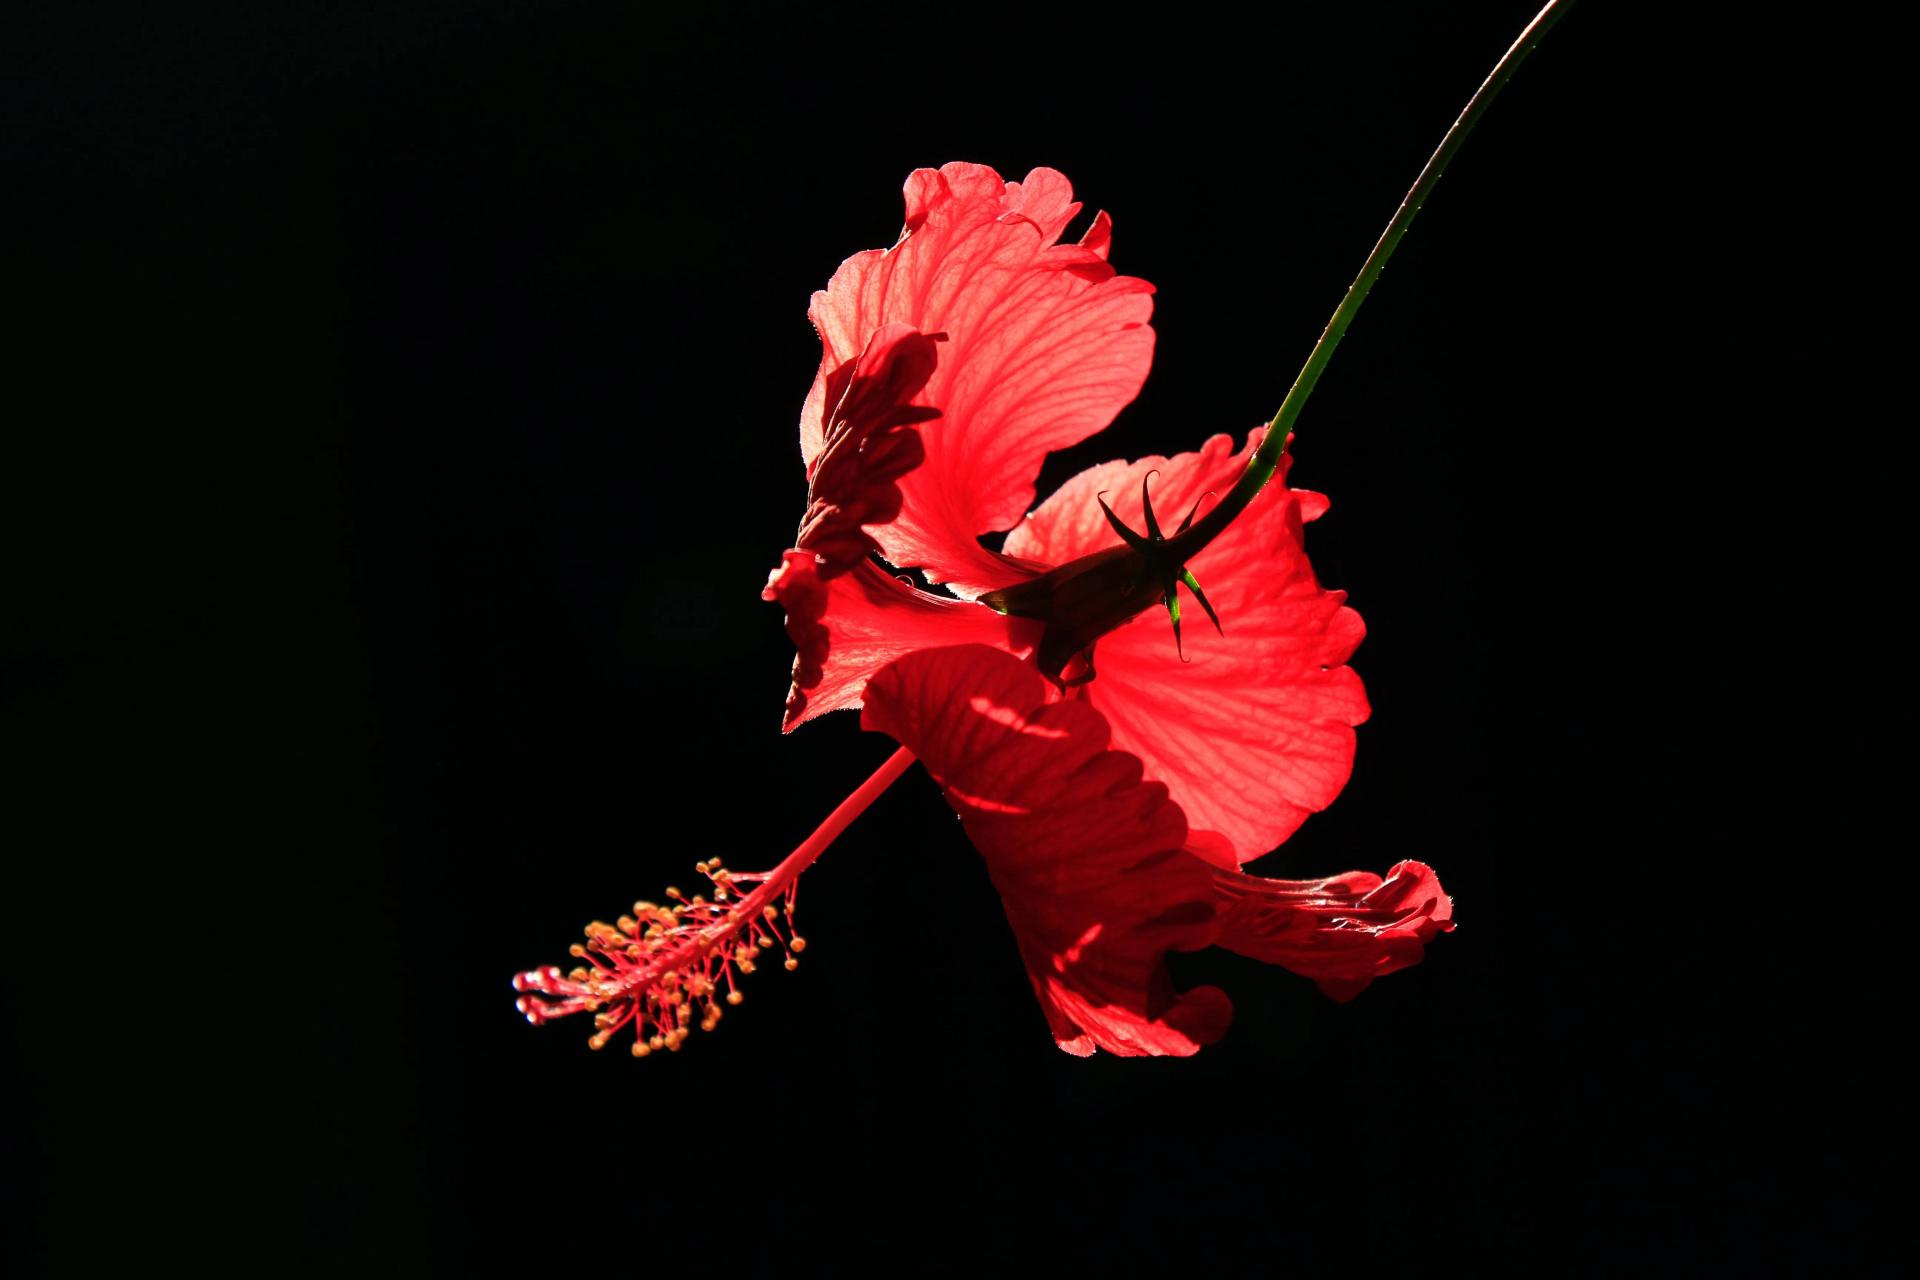 Black Background and Hibiscus